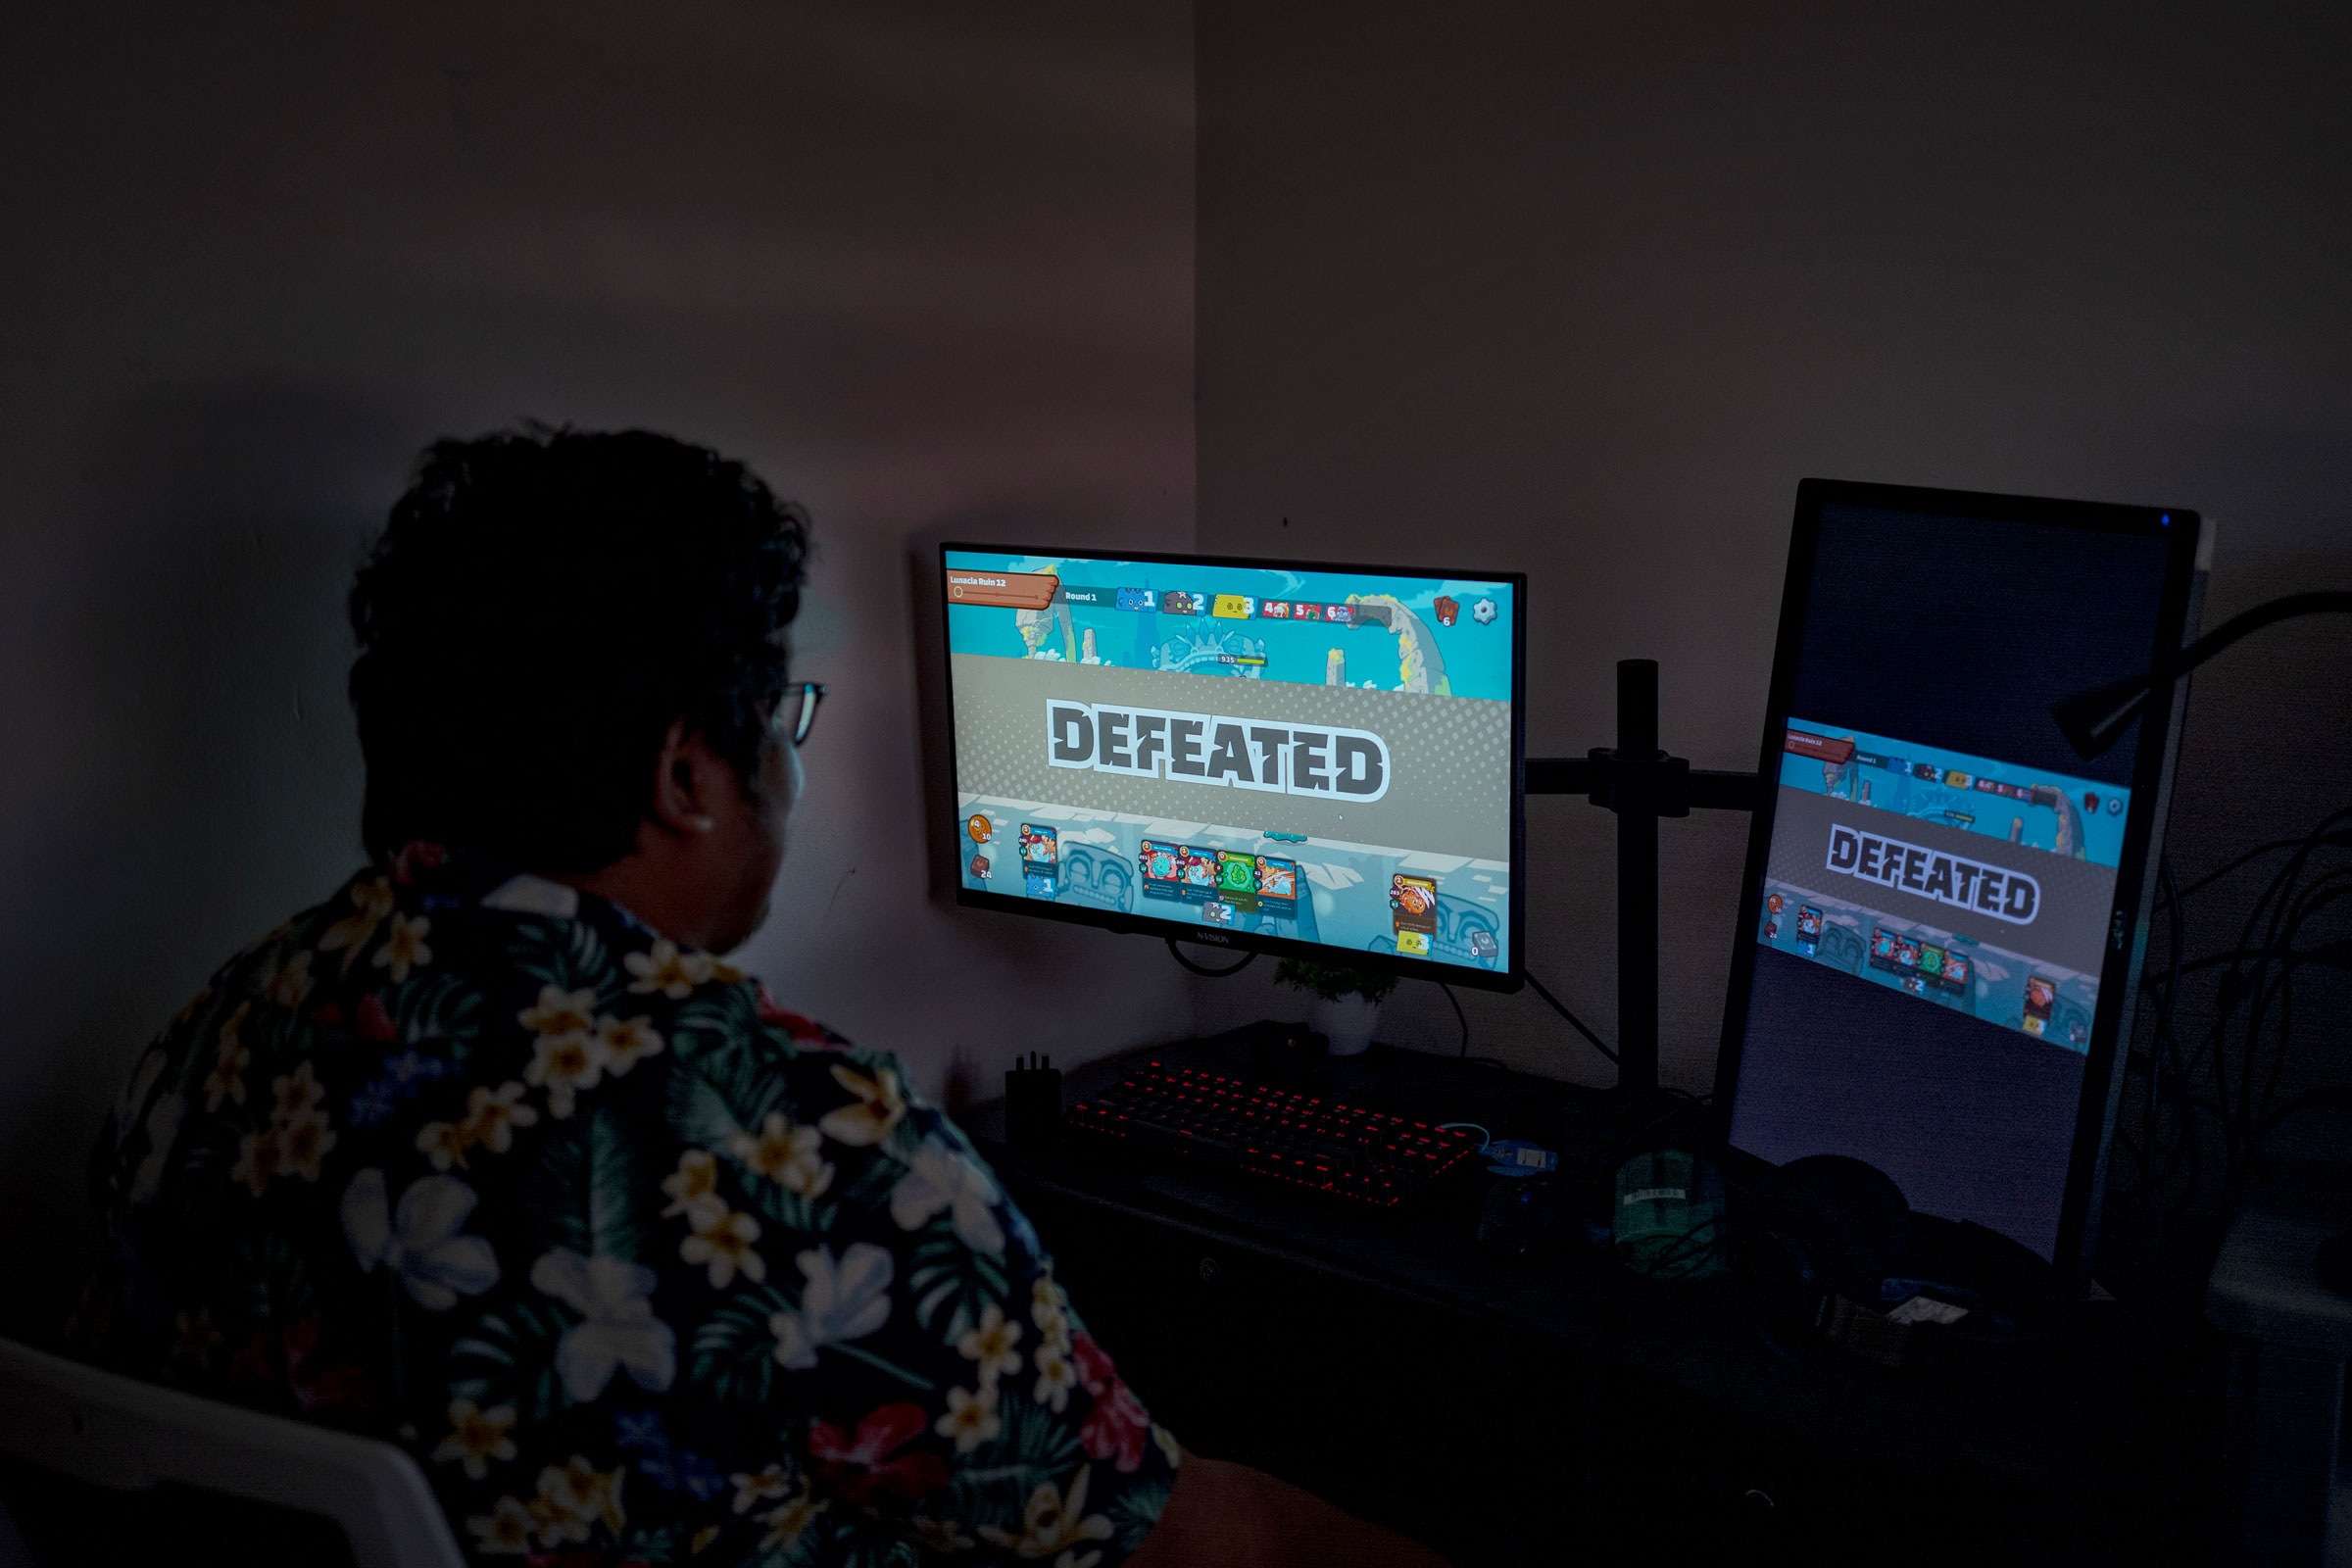 Albert Oasnon, an axis "boss", plays the game at his home in Imus, Cavite, on the outskirts of Manila, Philippines, on July 19, 2022. Oasnon, who works in content marketing and also runs a small media company, says that during the game's peak last year, he managed about 20 scholars.  (Ezra Acayan for TIME)